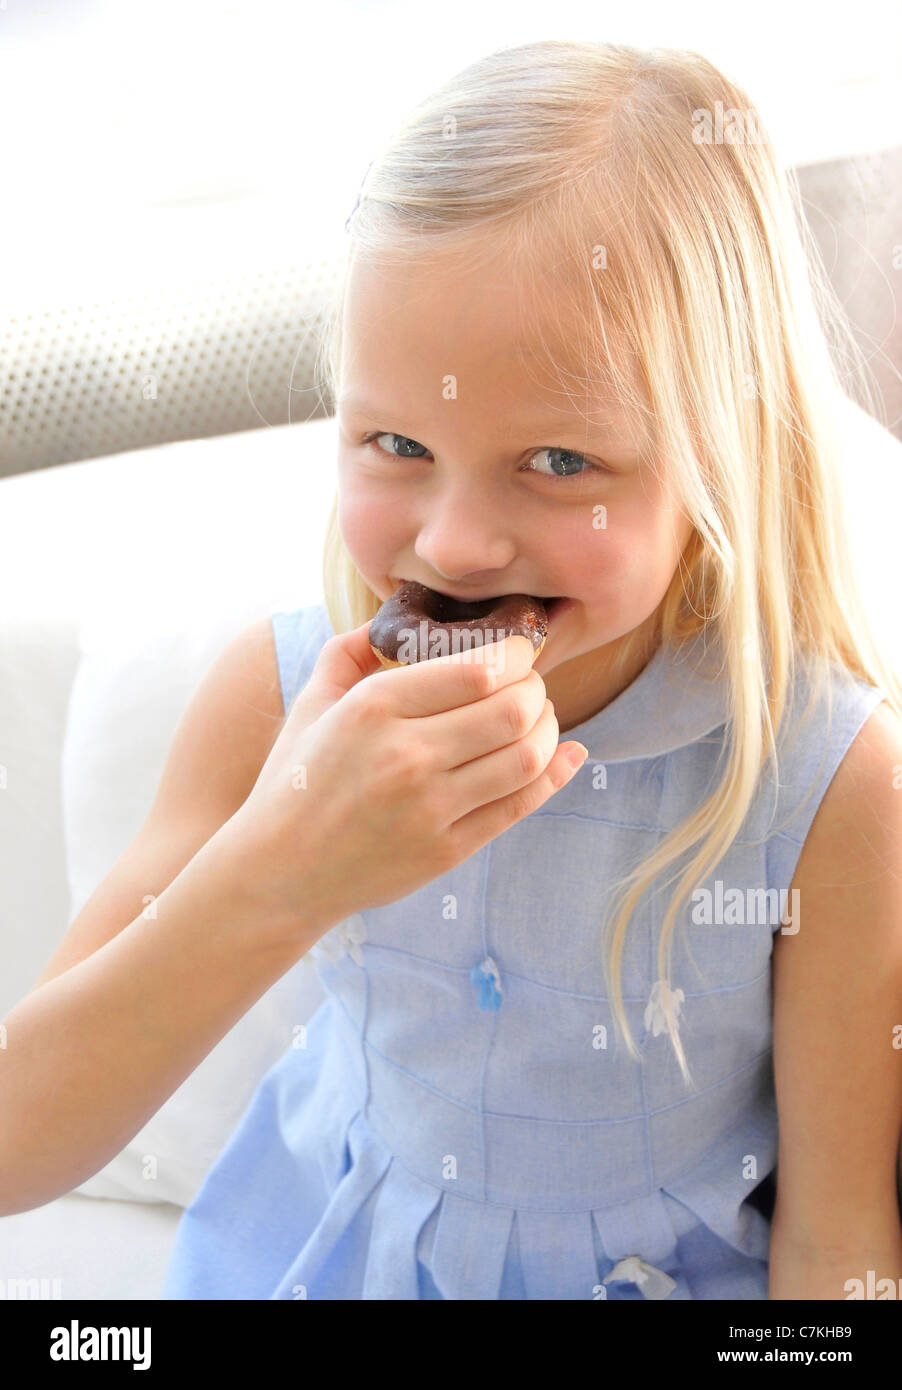 Young girl, 6, with a blue dress and a chocolate donut in her hand Stock Photo